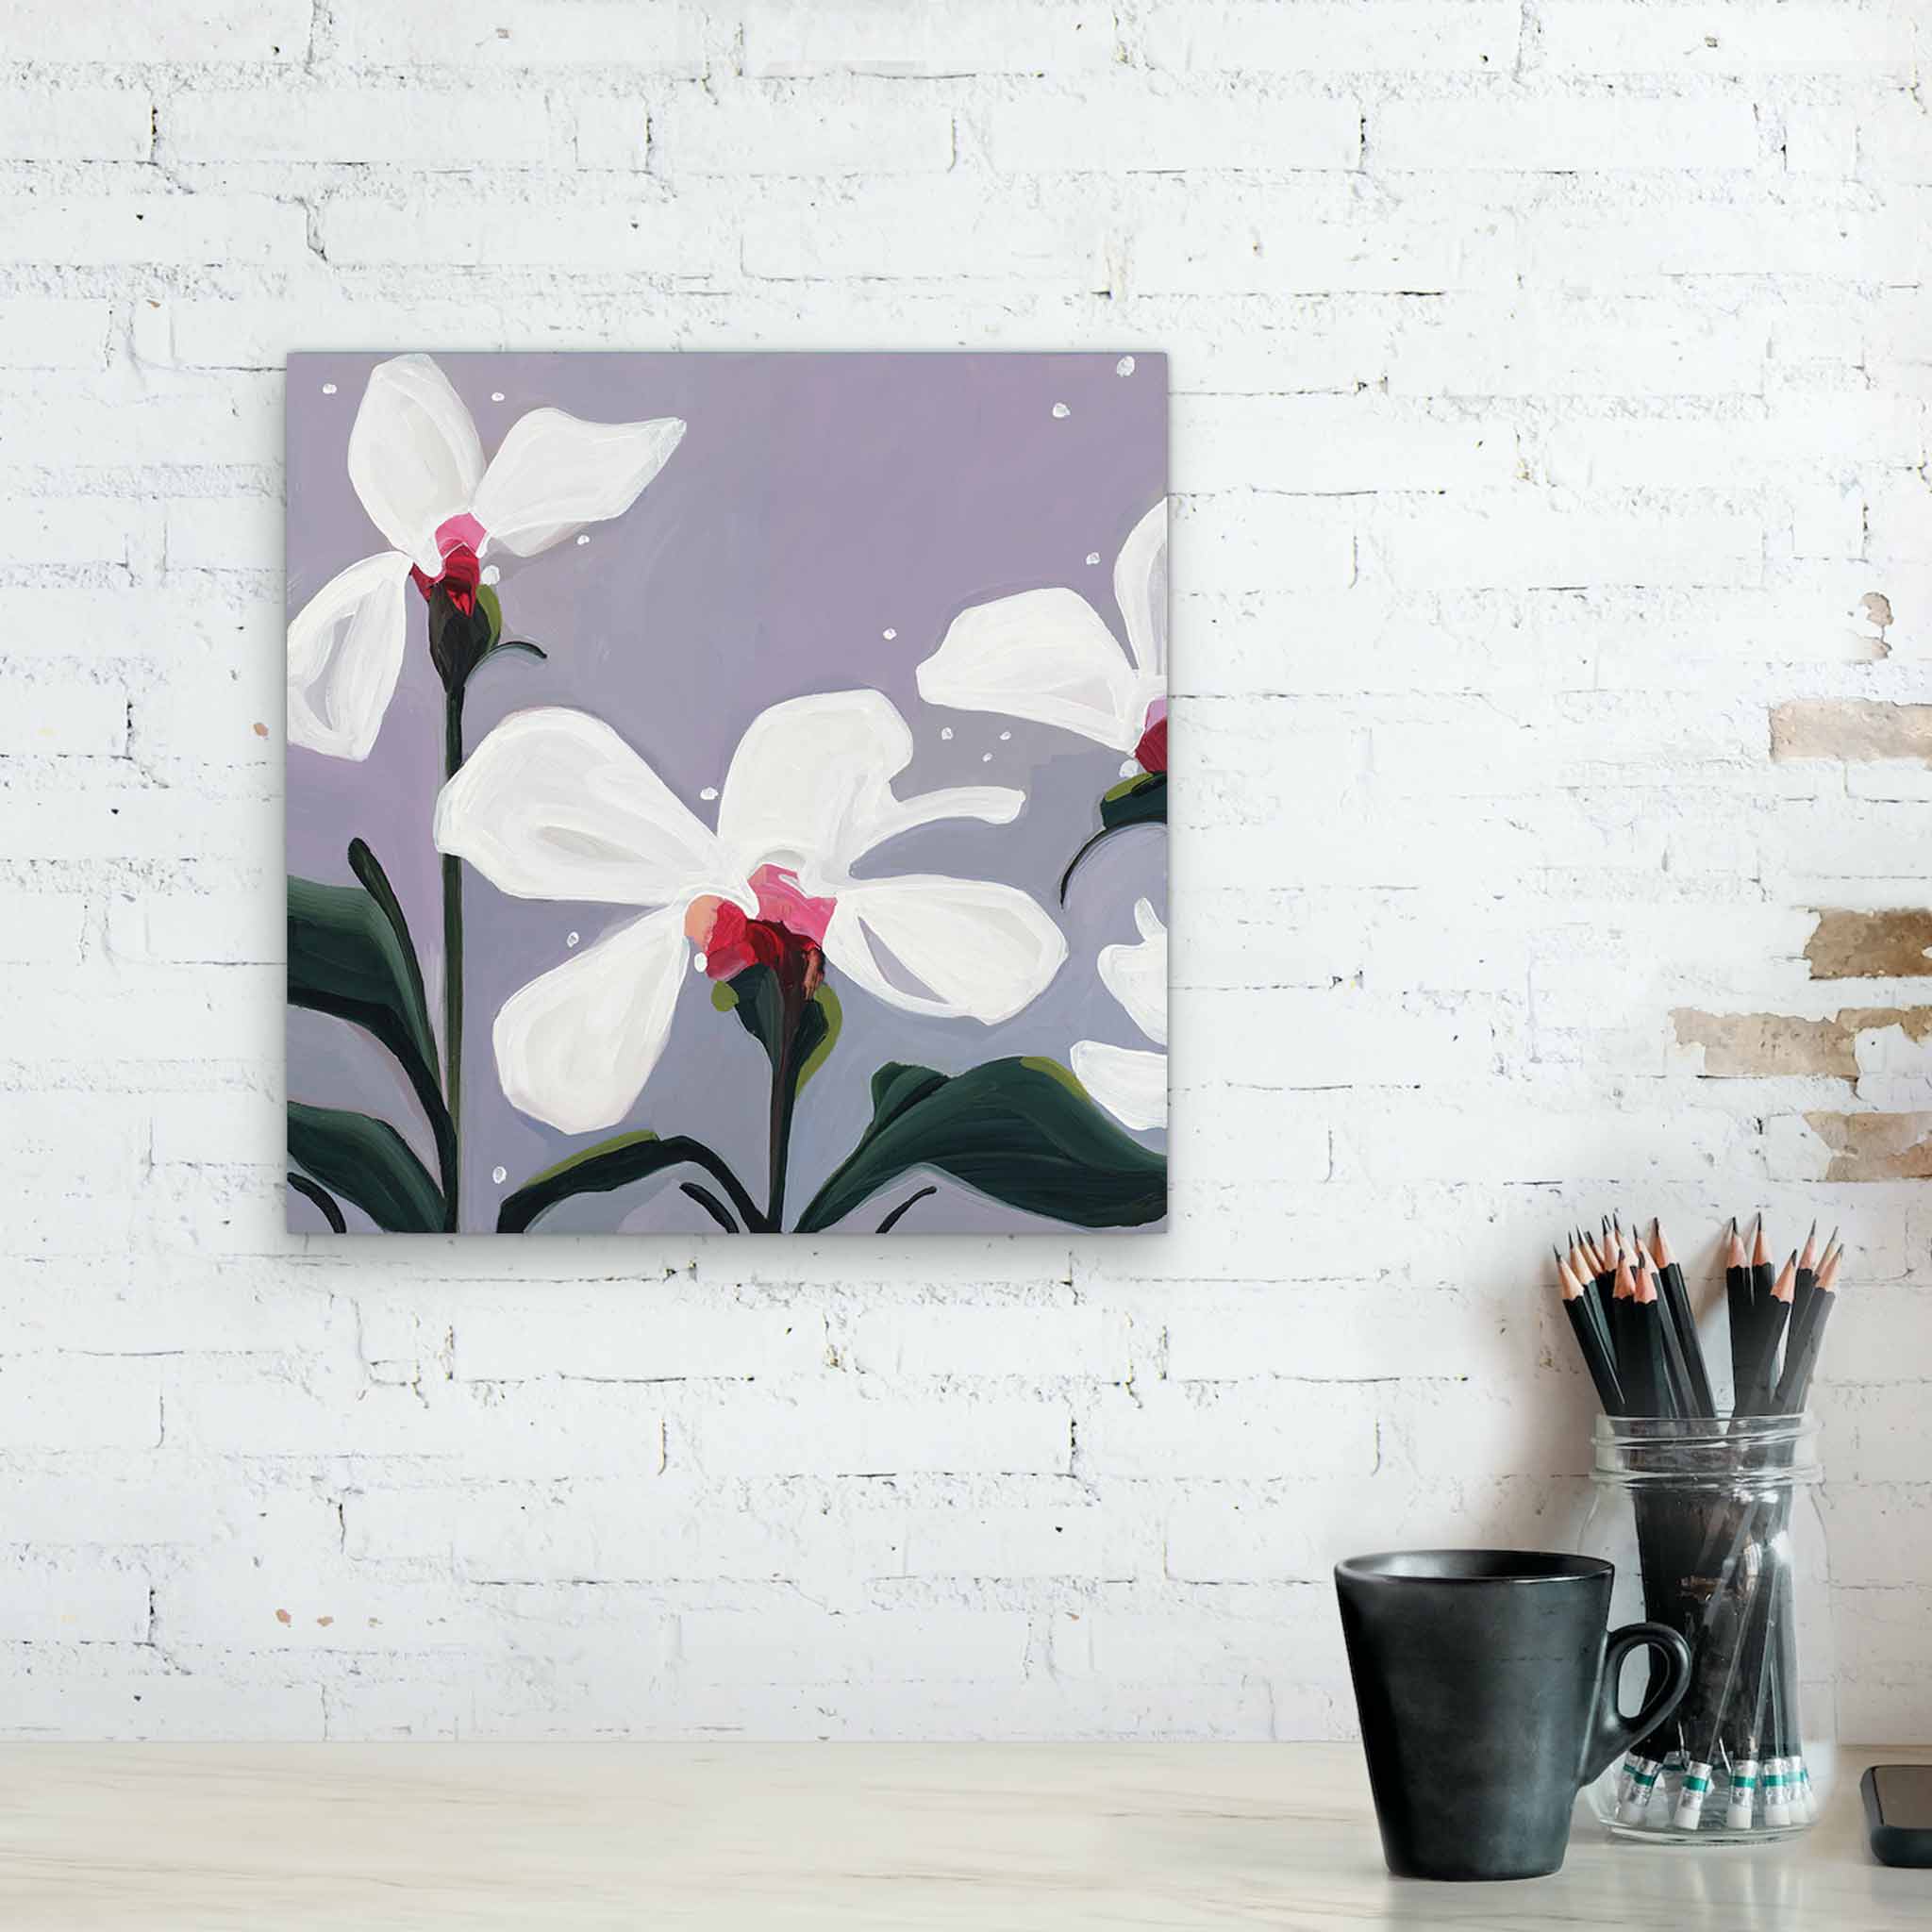 acrylic flower painting lavender